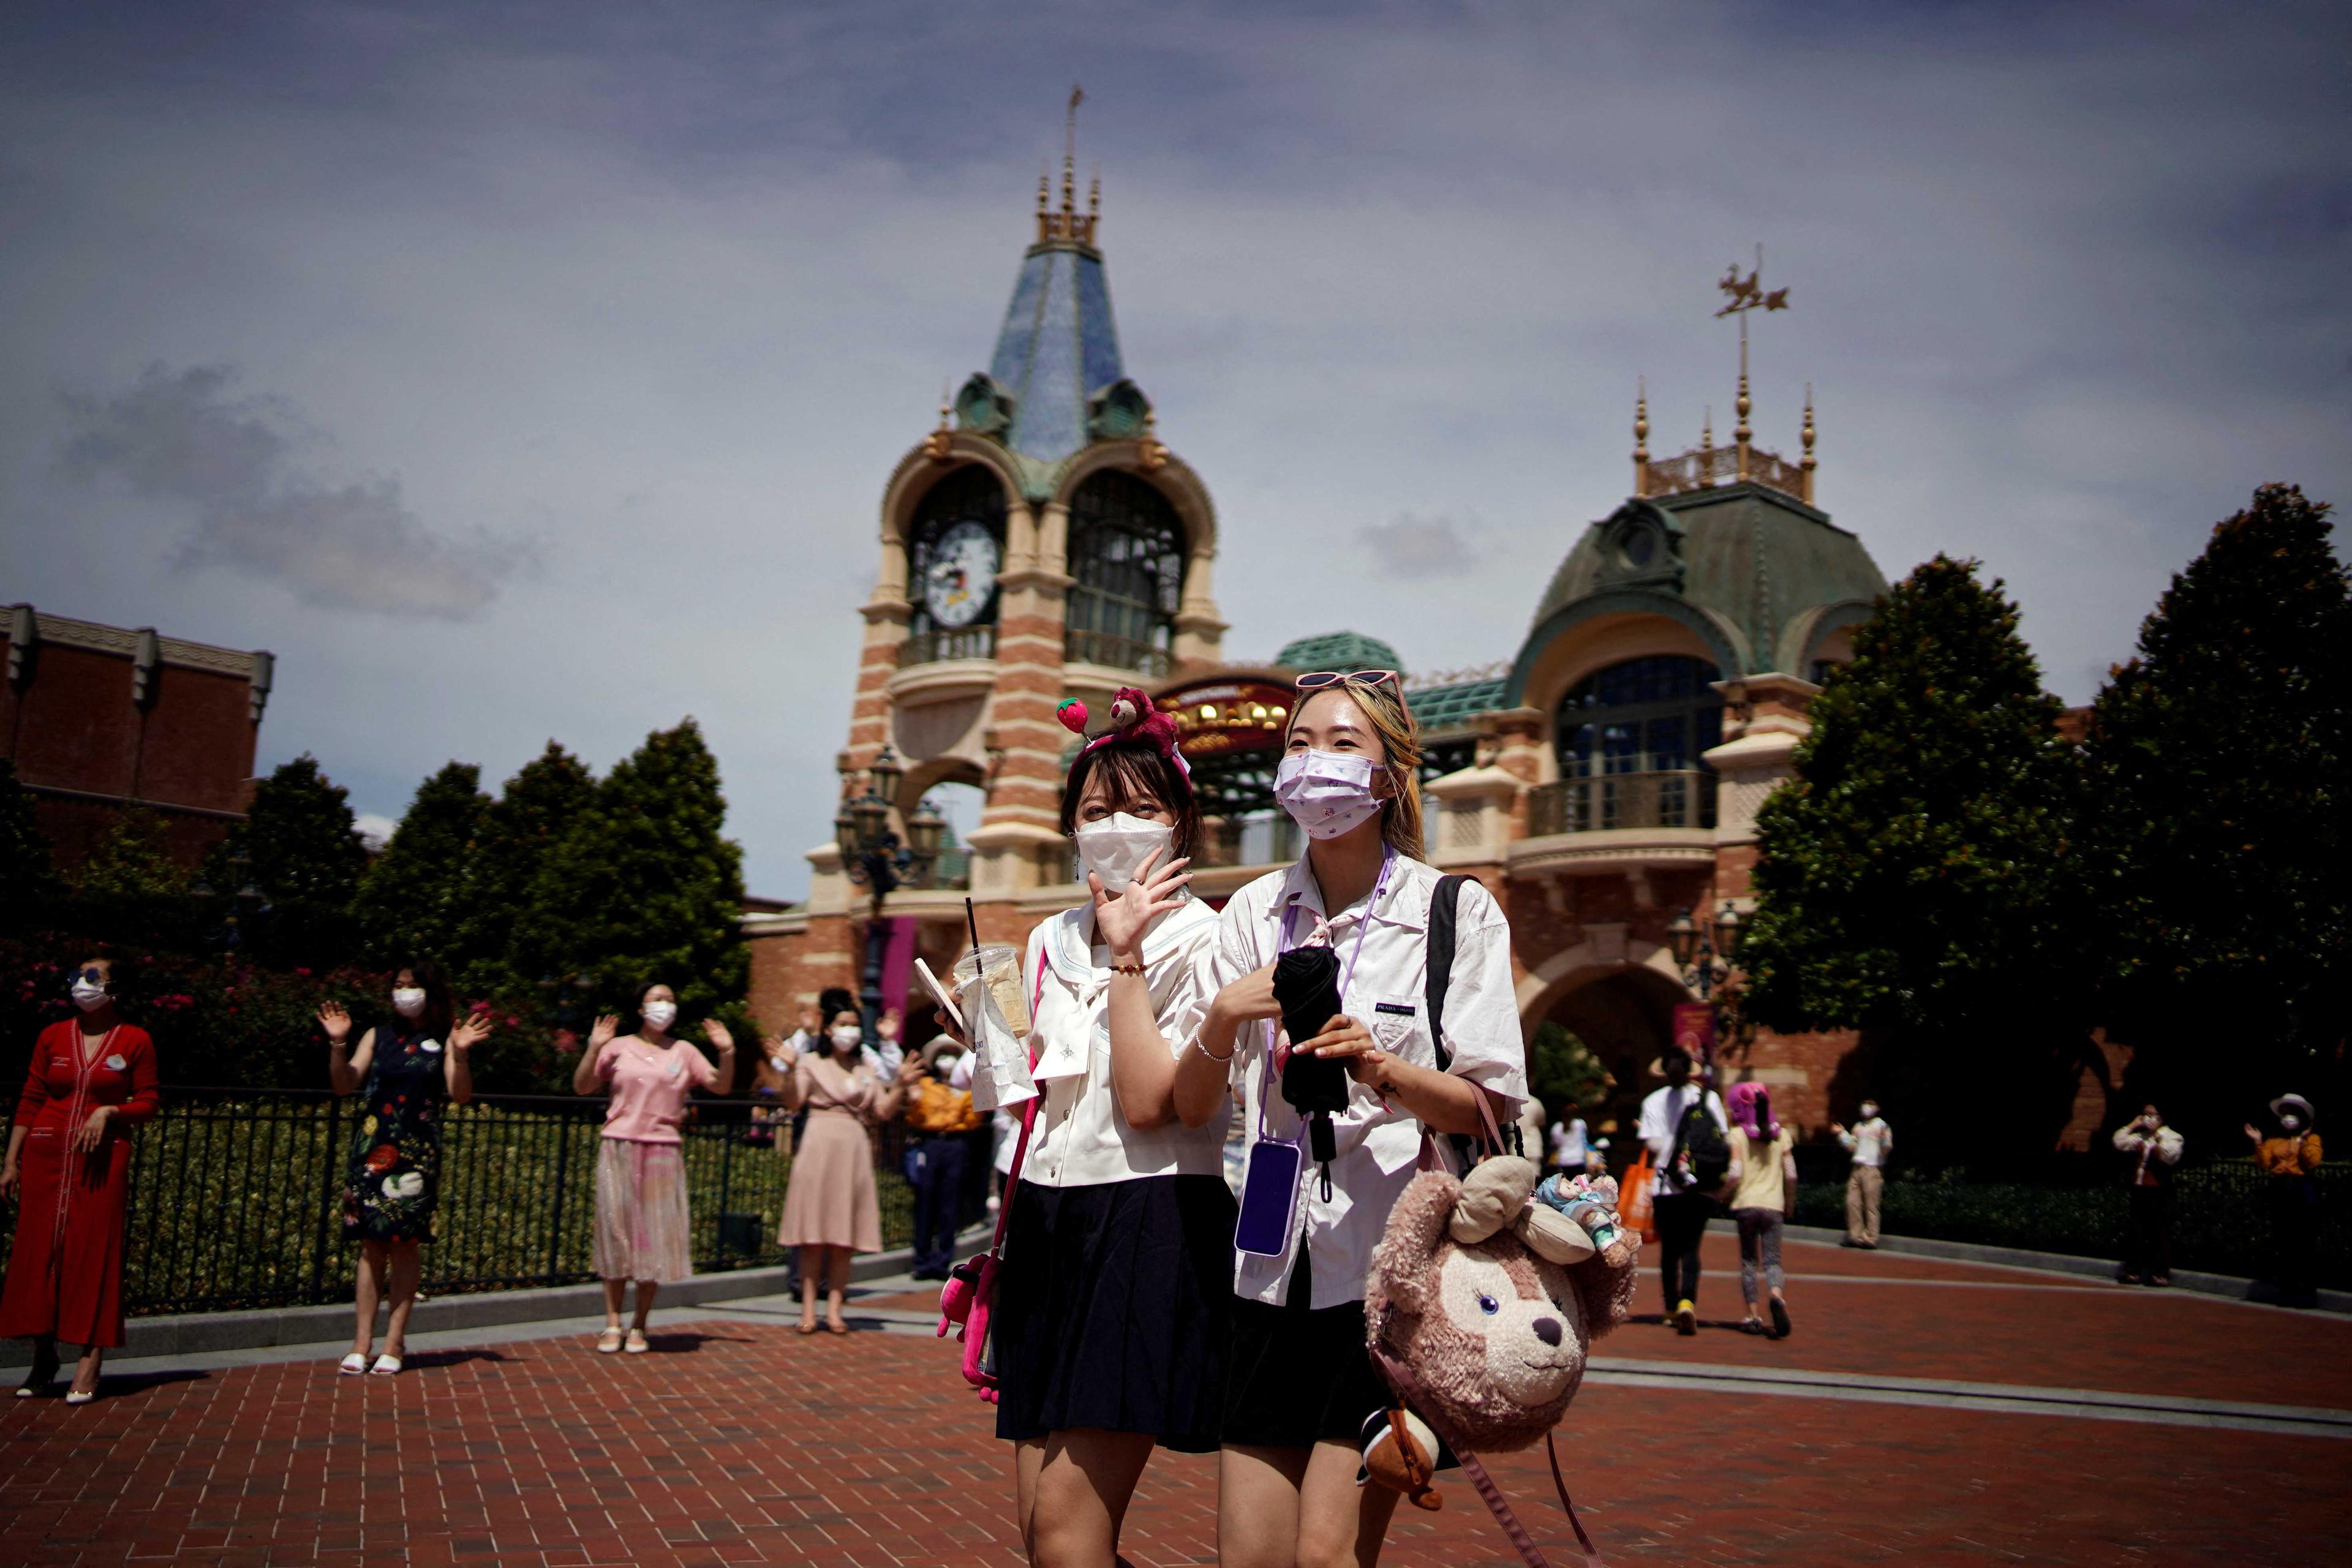 People wearing face masks visit the Shanghai Disney Resort, as the Shanghai Disneyland theme park reopens after being shut for the Covid-19 outbreak, in Shanghai, China June 30. Photo: Reuters